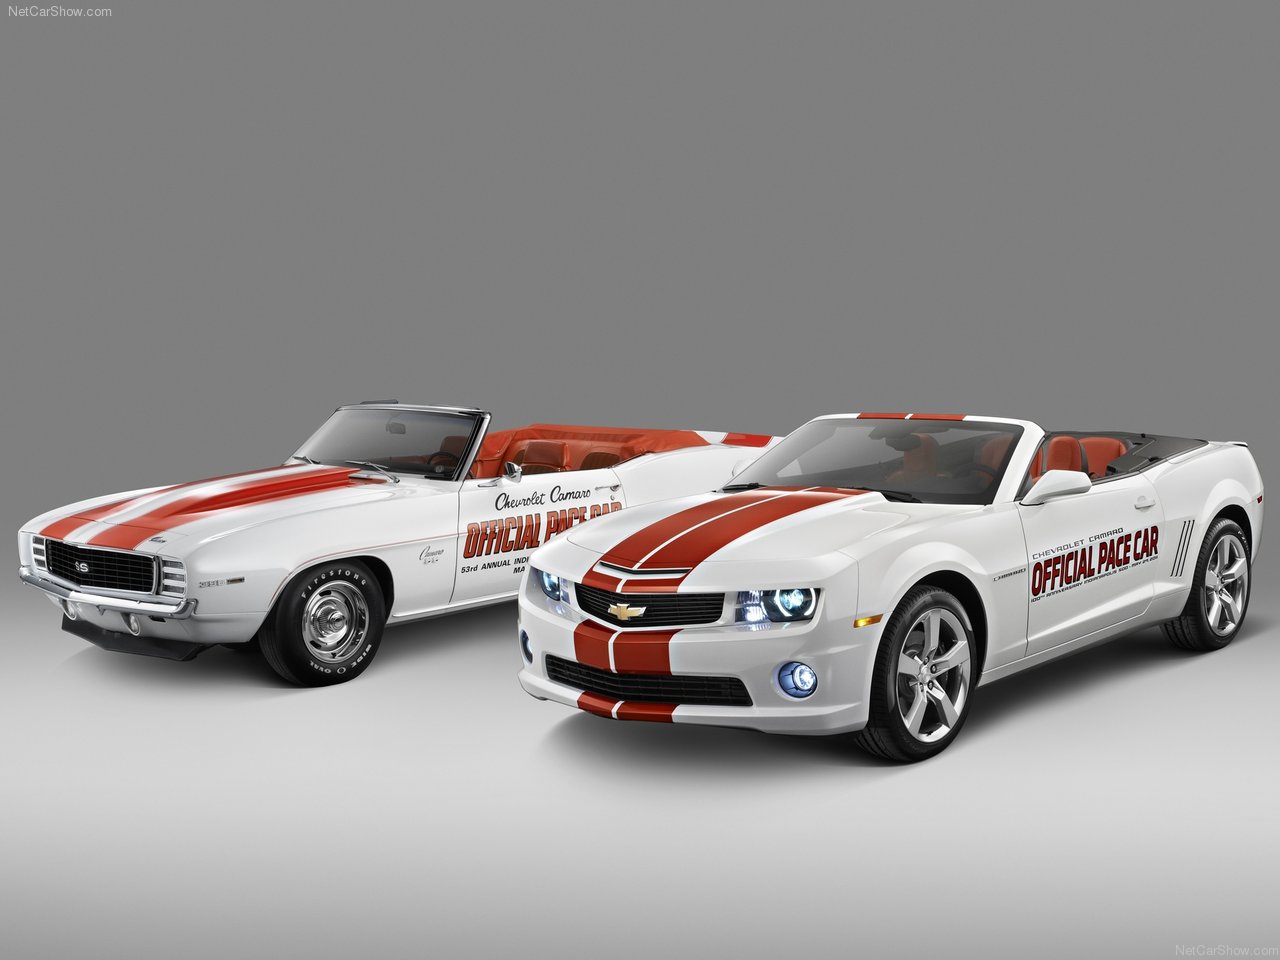 ... automobiles: 2011 Chevrolet Camaro SS Convertible Indy 500 Pace Car